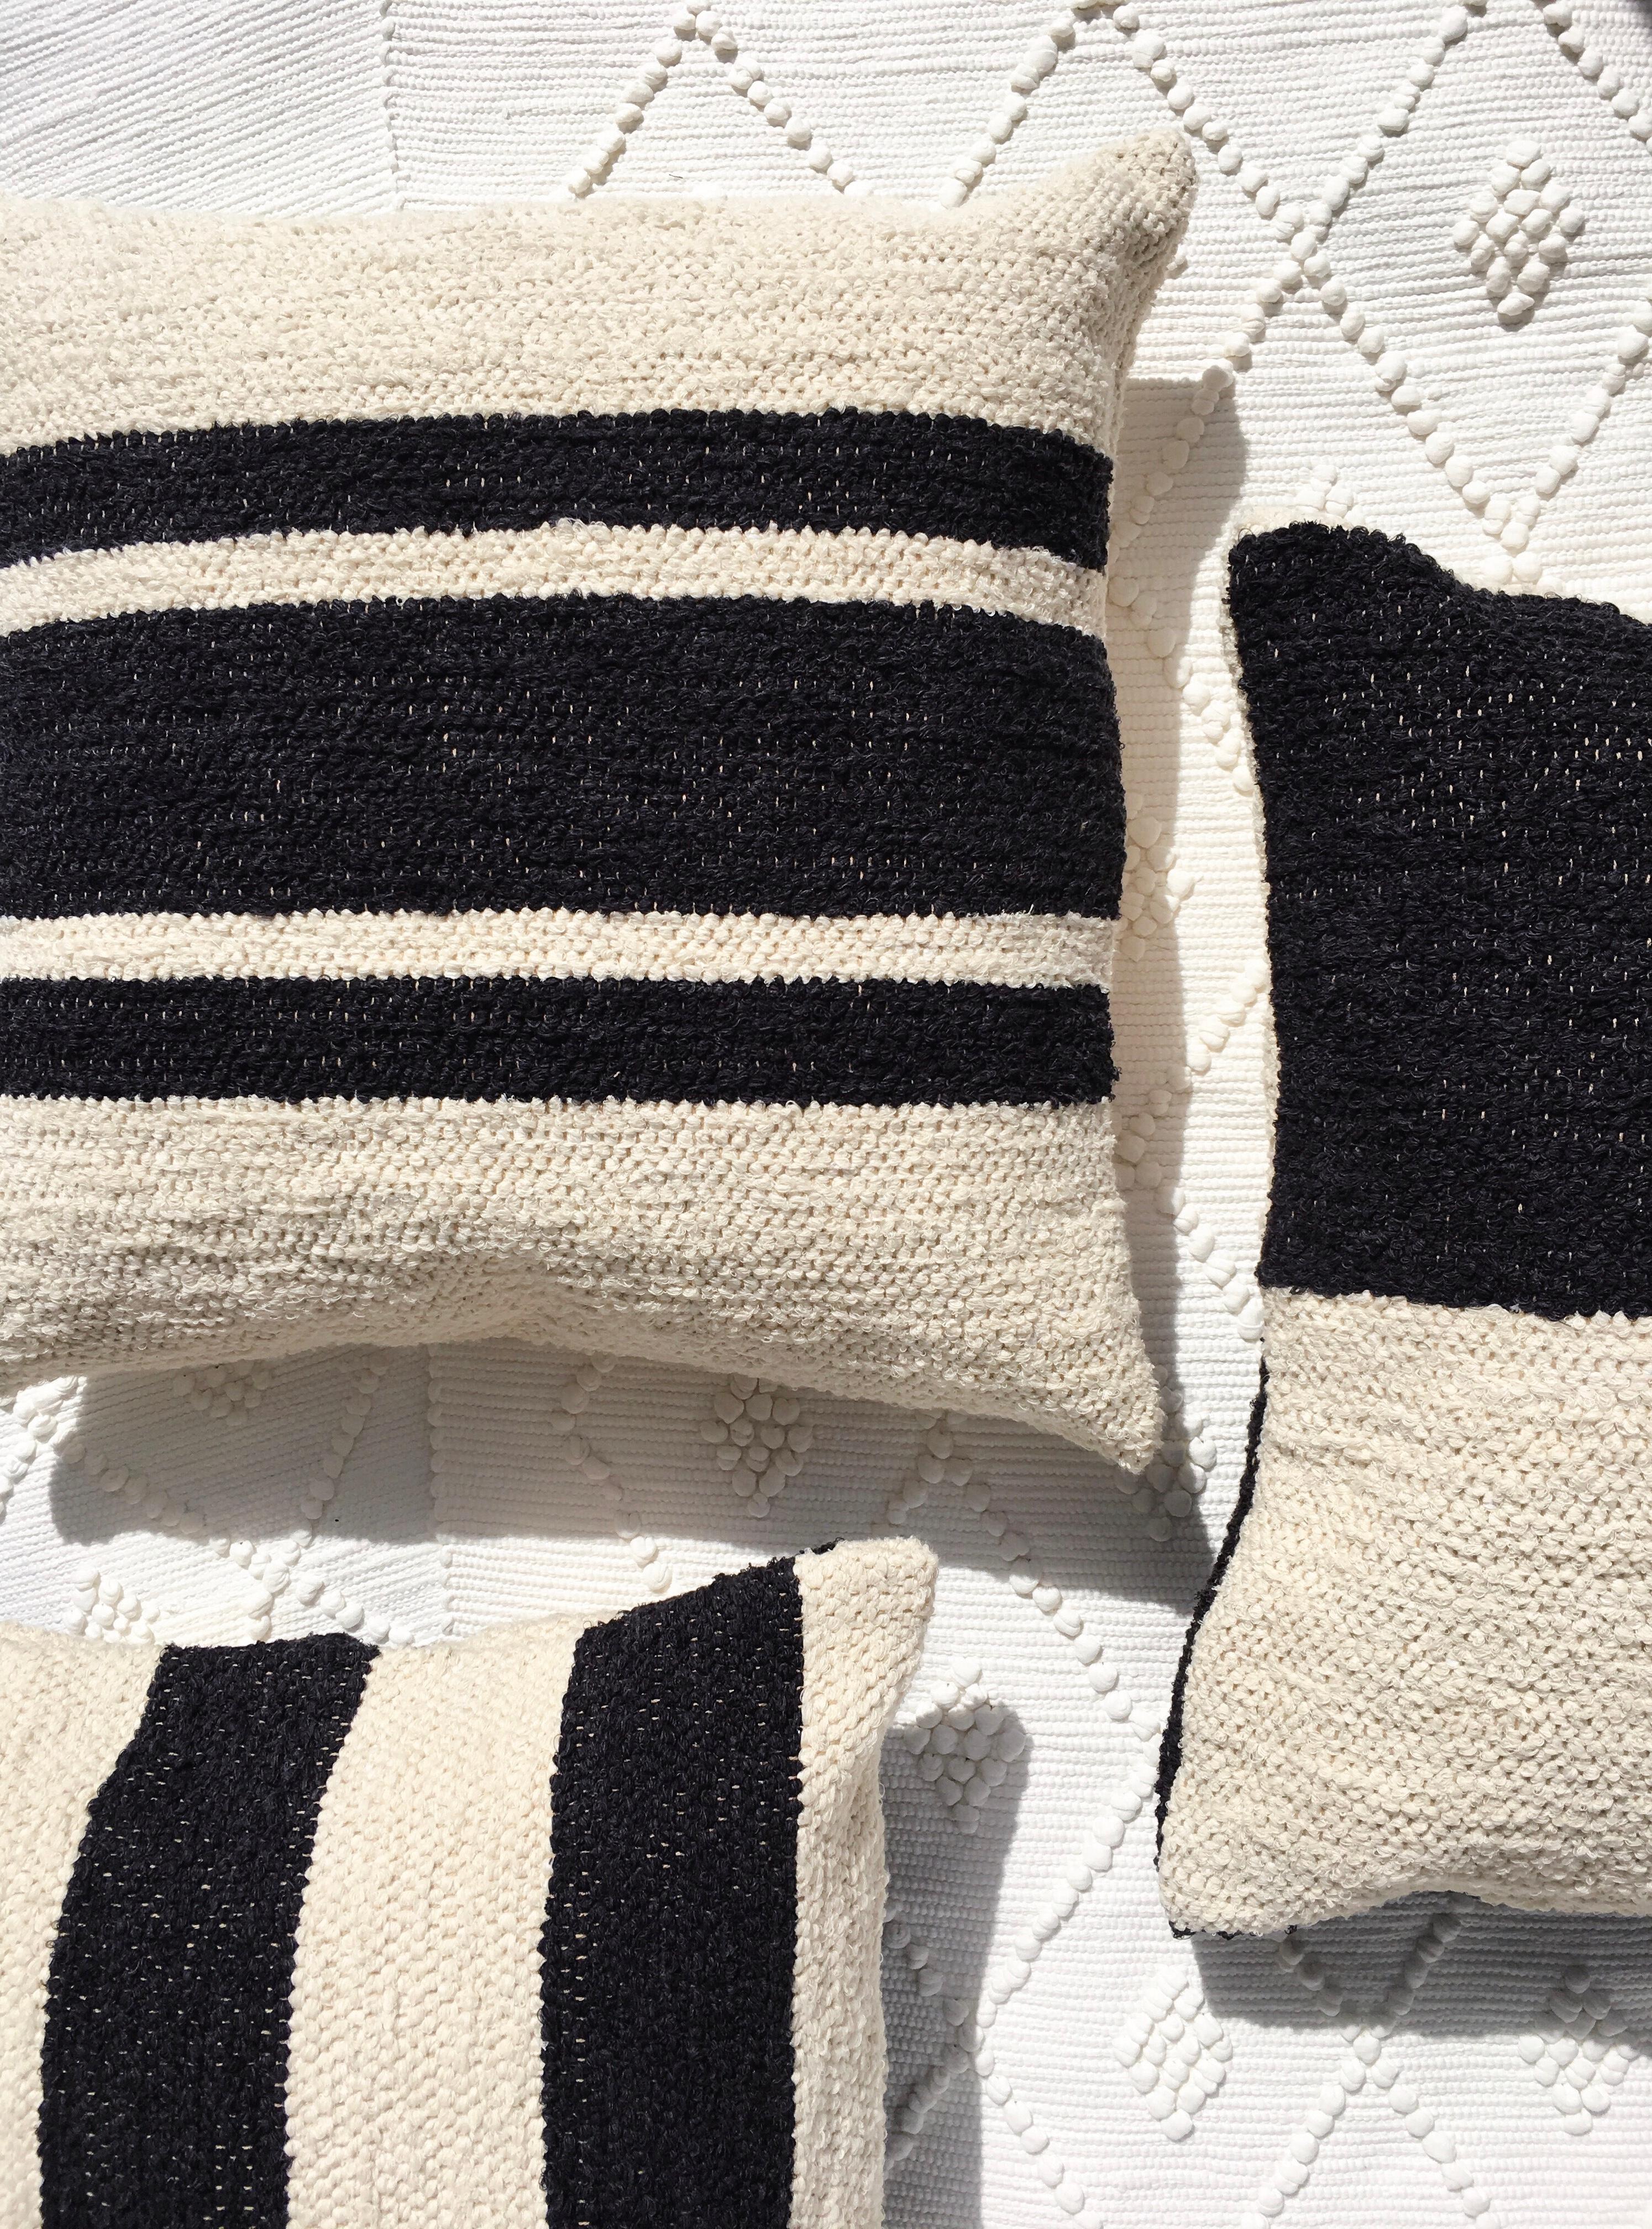 Hand-Woven Casa Cubista Handwoven Cotton Black and White Color Block Throw Pillow, in Stock For Sale